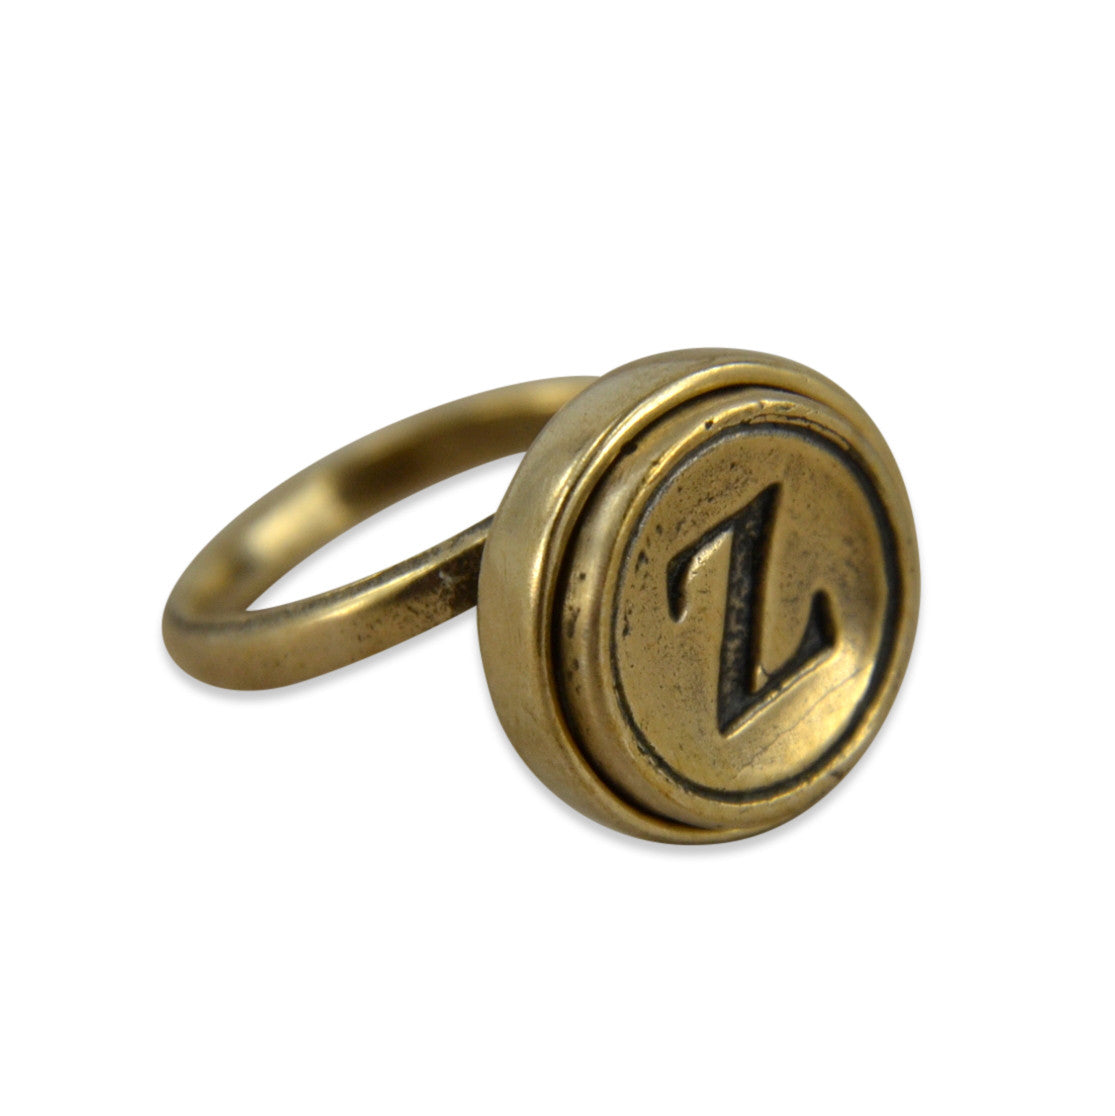 Personalized Letter Ring - Gwen Delicious Jewelry Designs